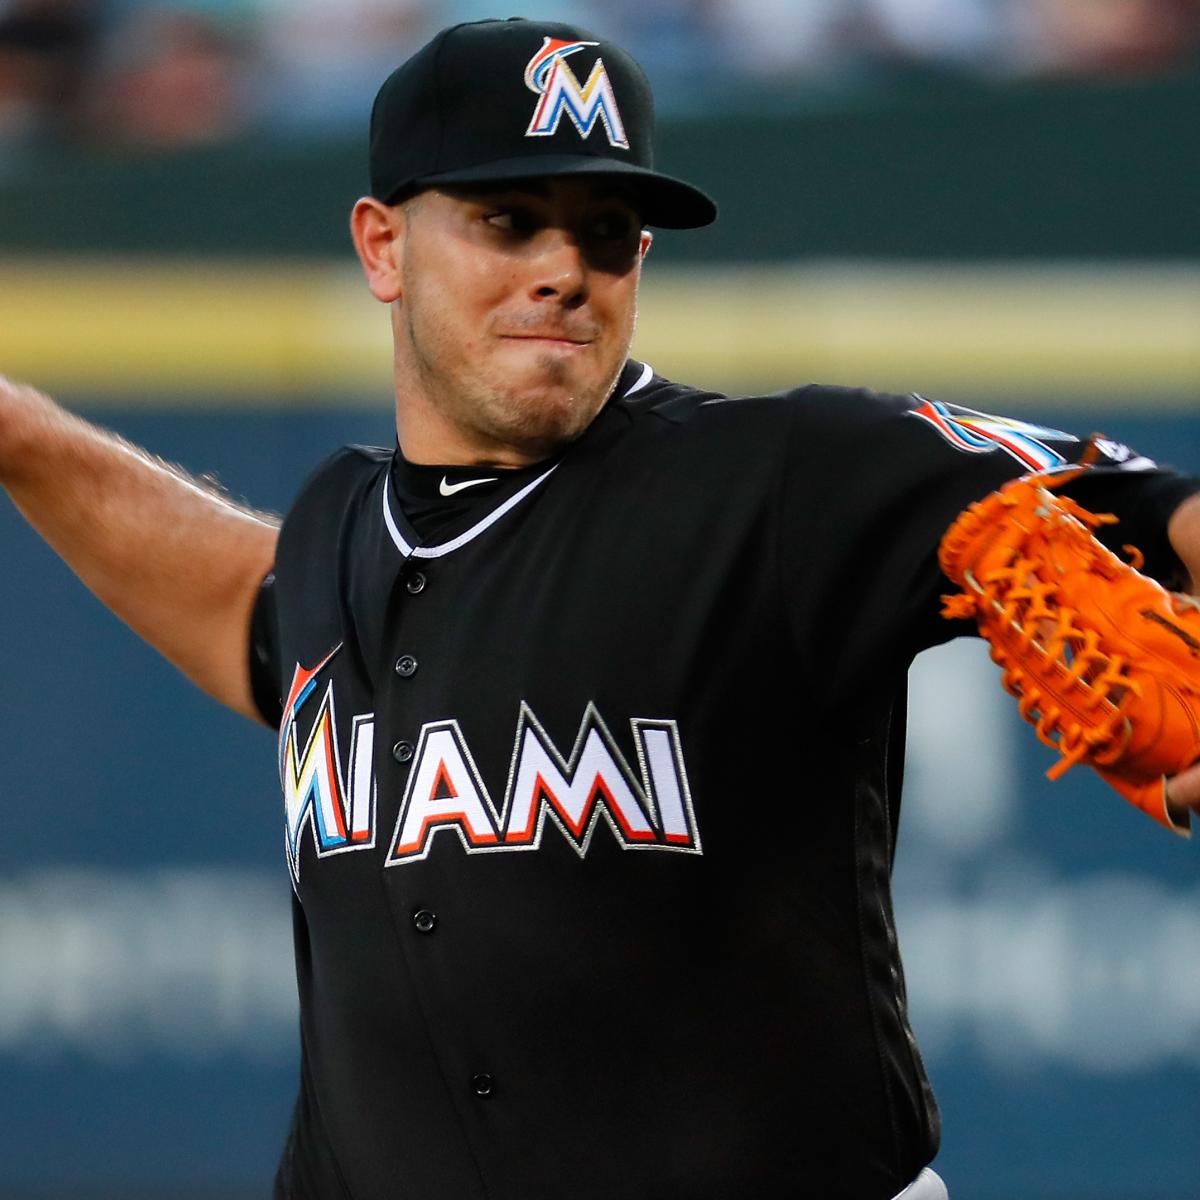 Jose Fernandez Had Cocaine, Alcohol in System at Time of Fatal Boat ...